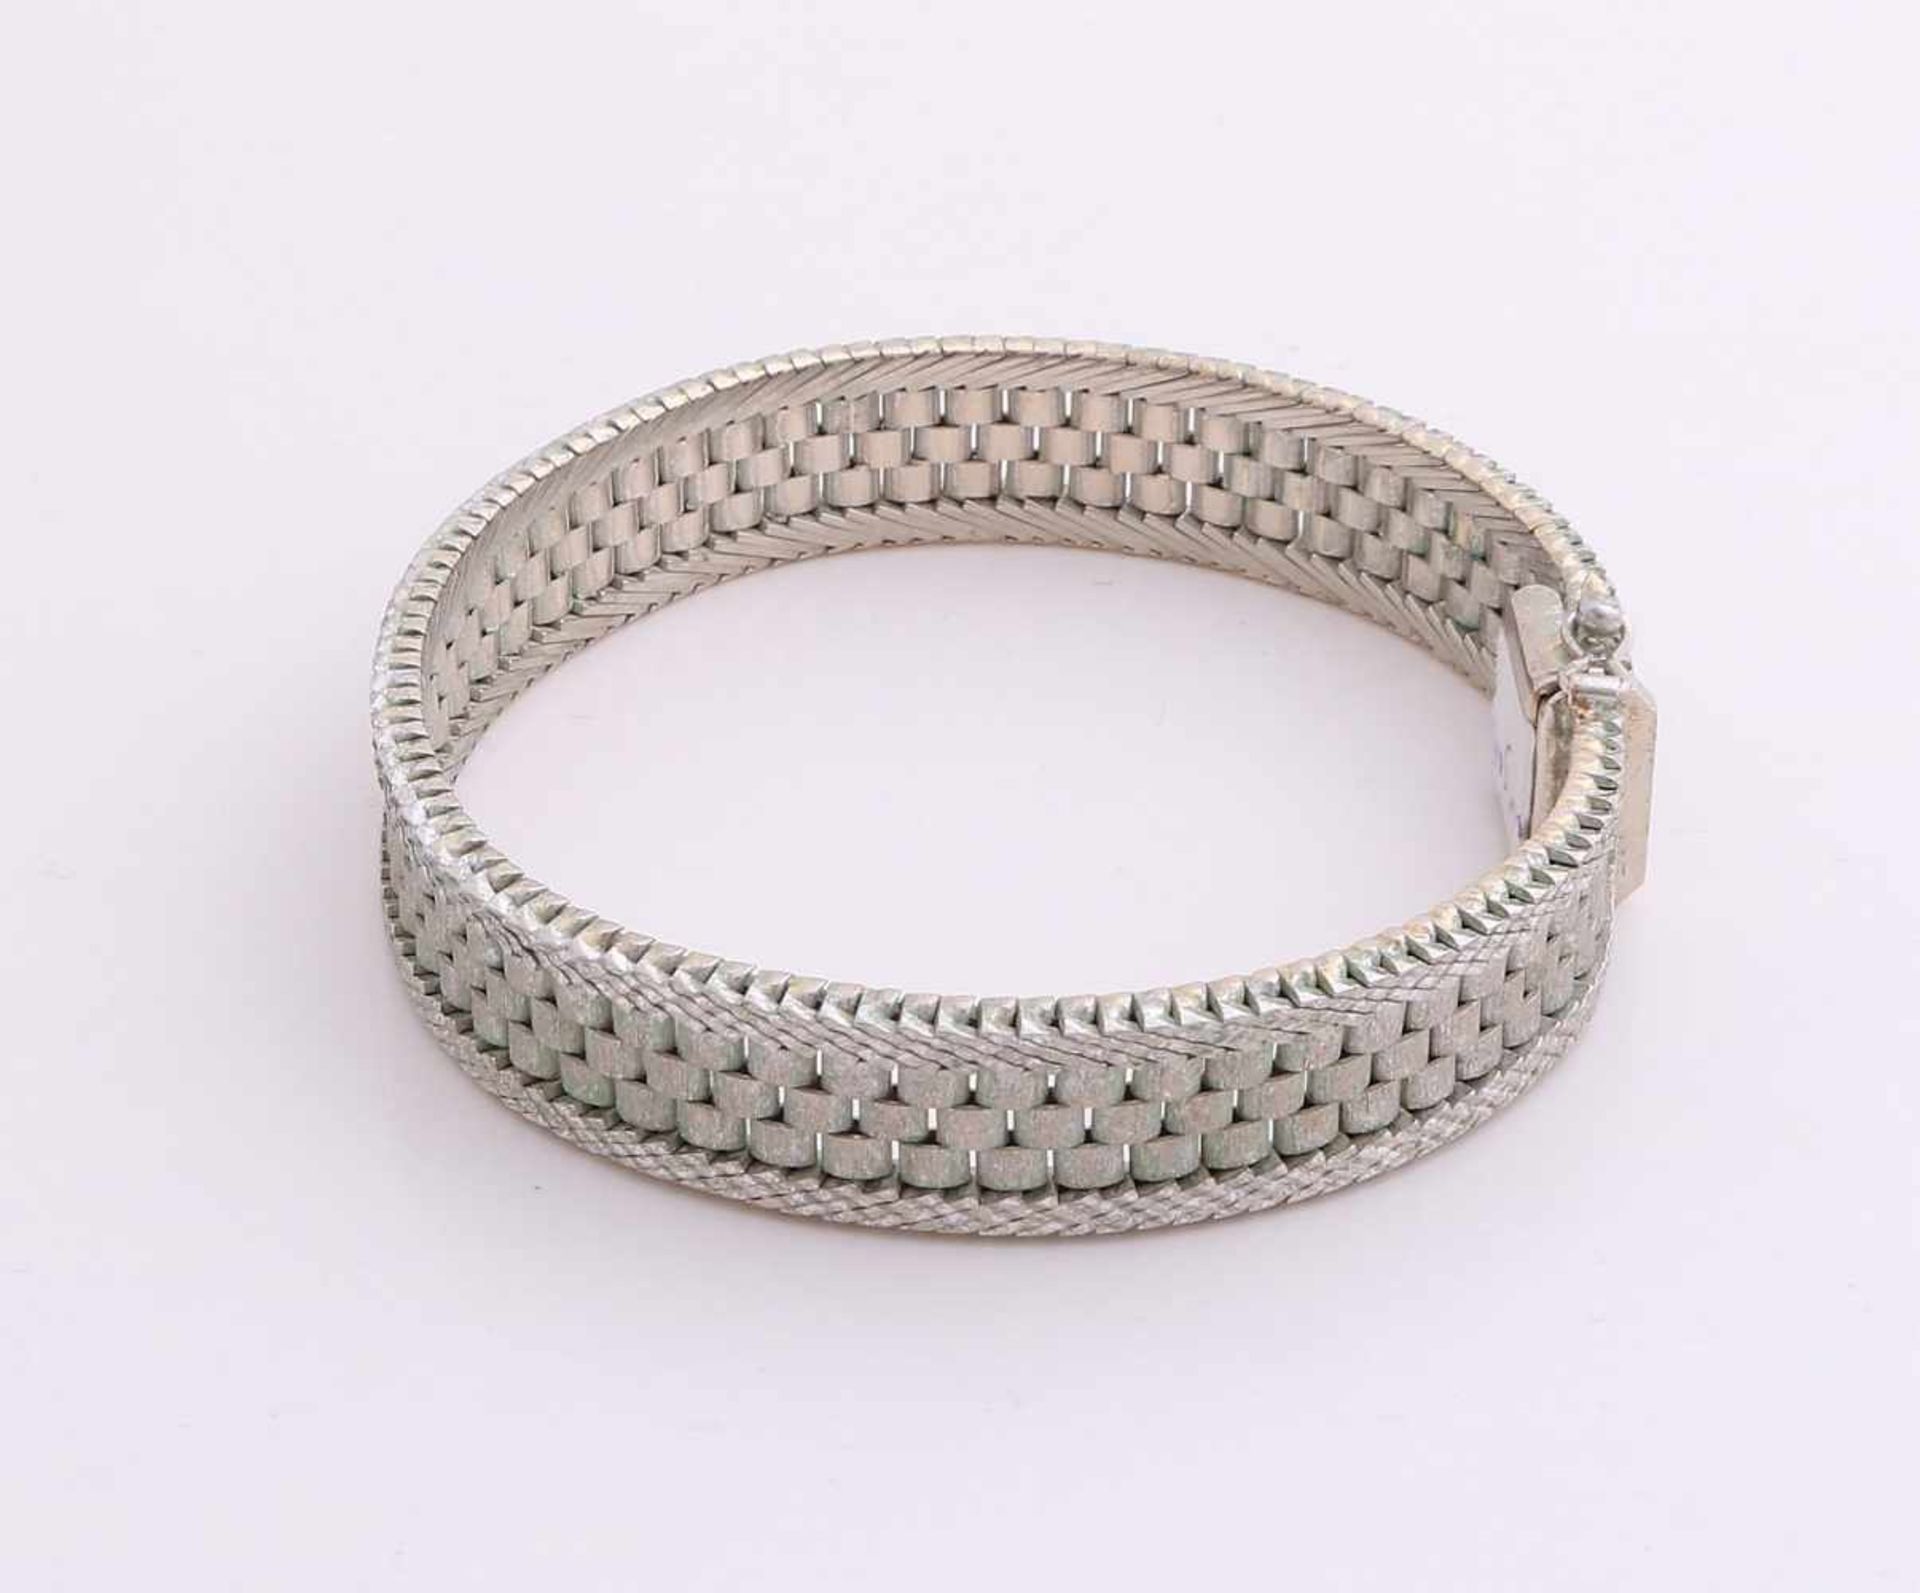 Elegant white gold bracelet, 585/000, broad model with brick links in the center and along the edges